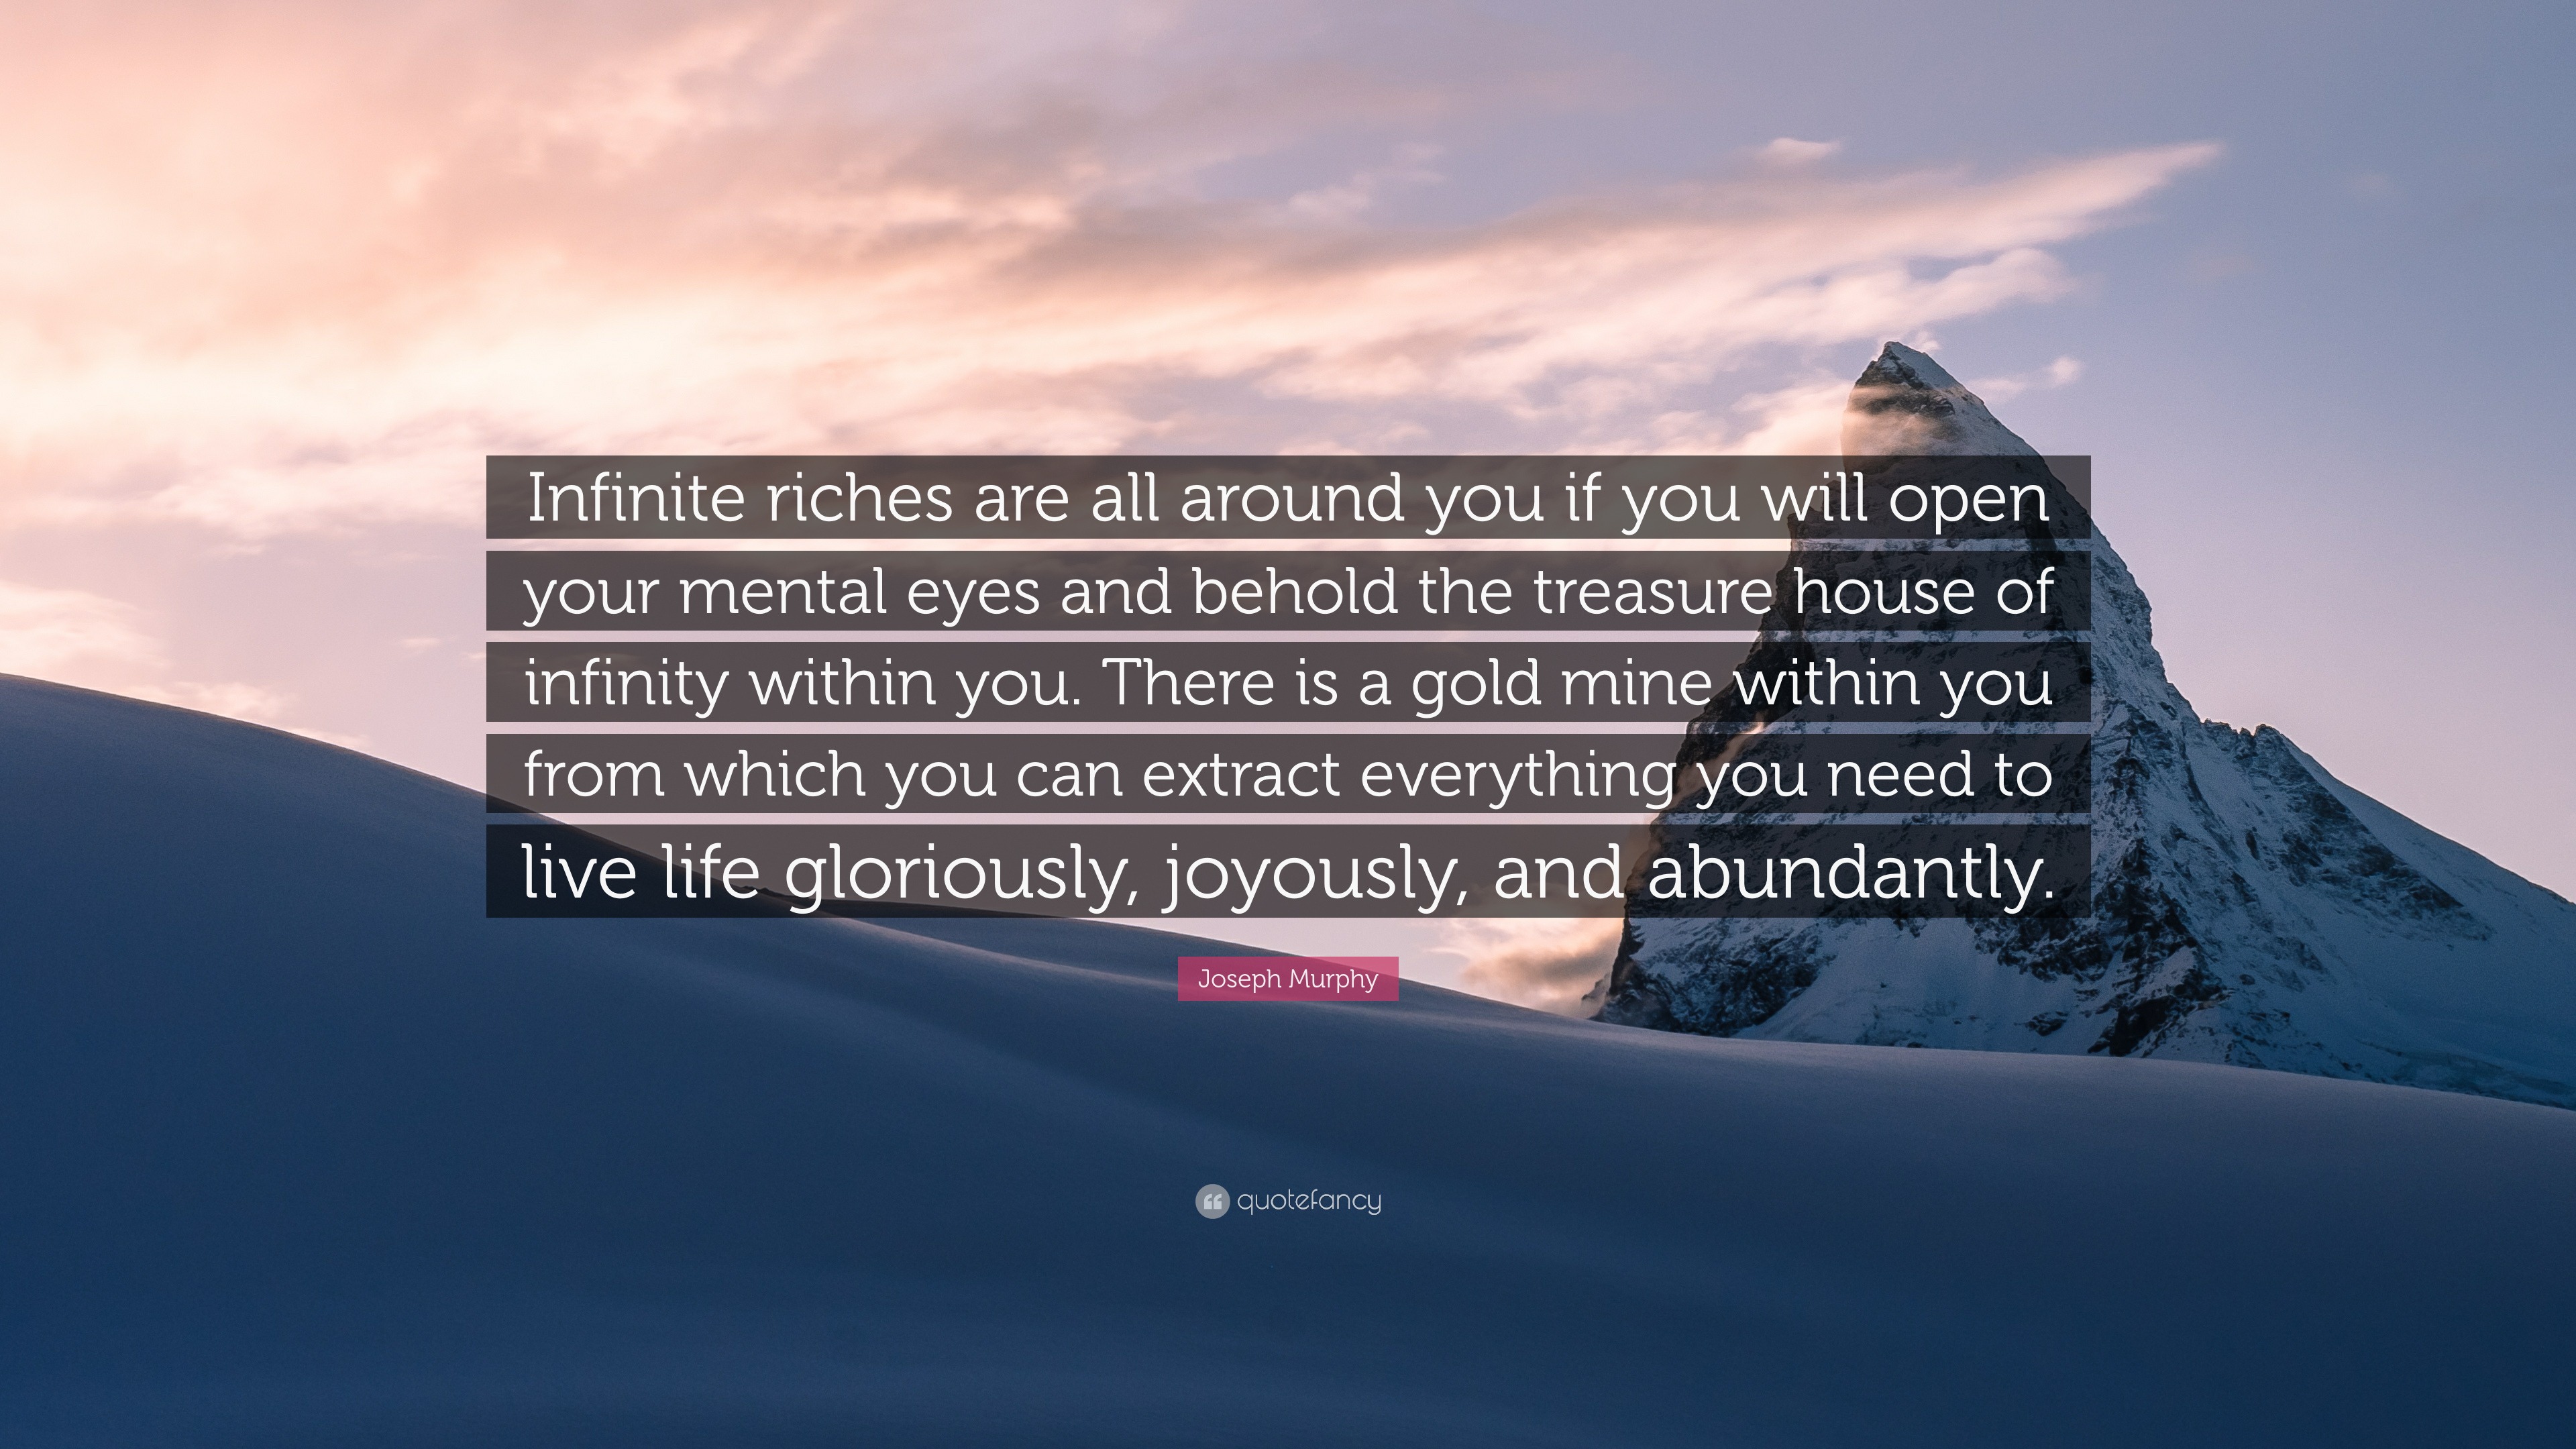 Joseph Murphy Quote “Infinite riches are all around you if you will open your